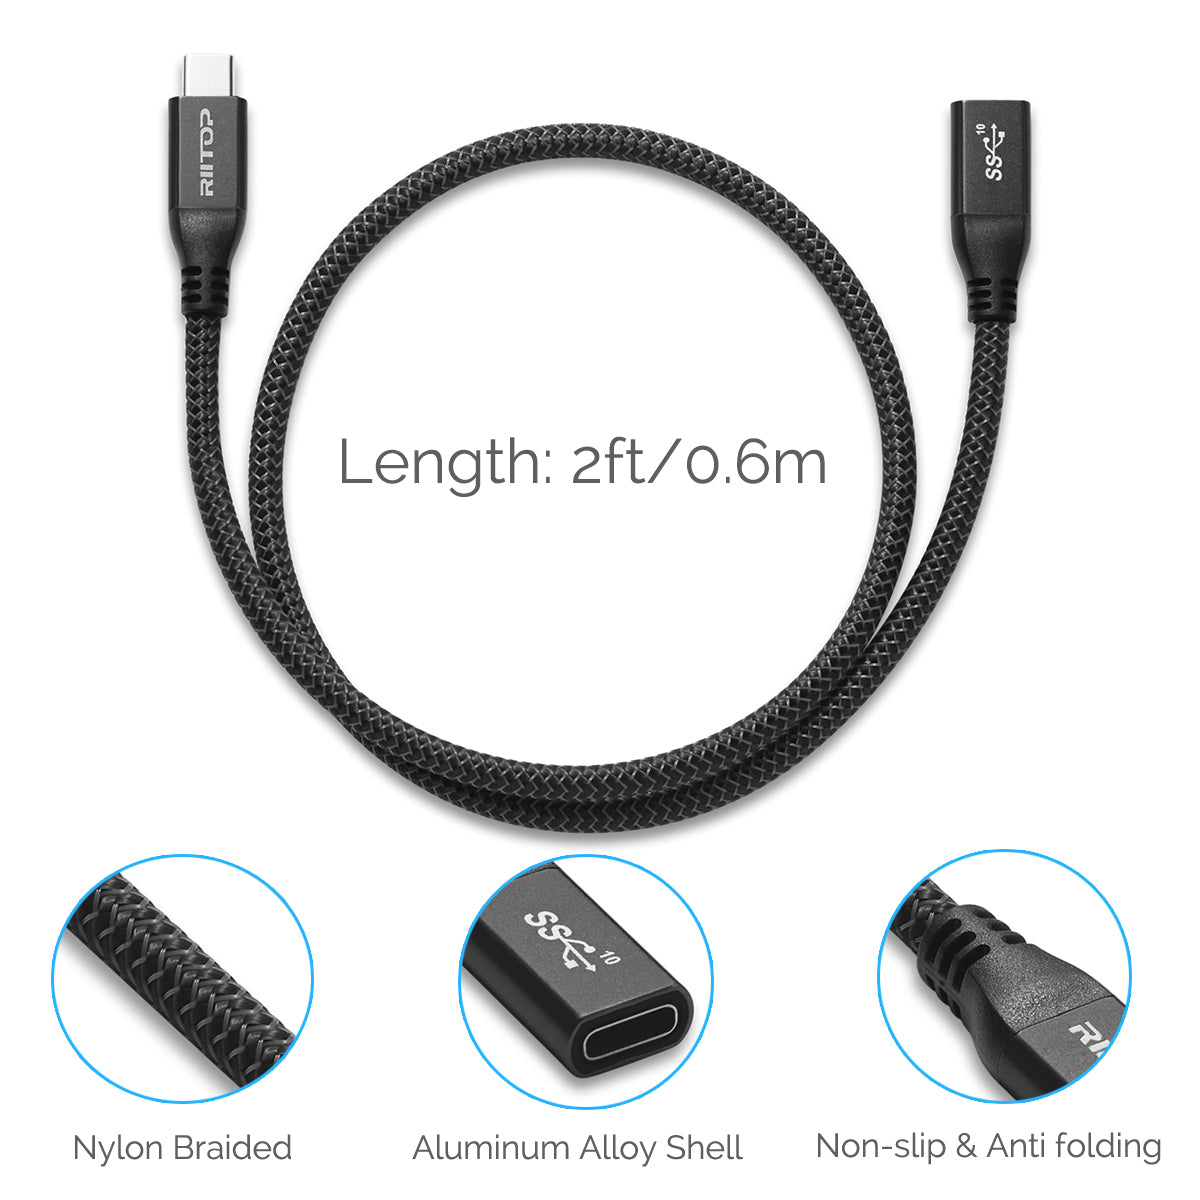 USB C to C Cable 100W PD Charging [10FT], RIITOP USB 3.1 Type-C Cable